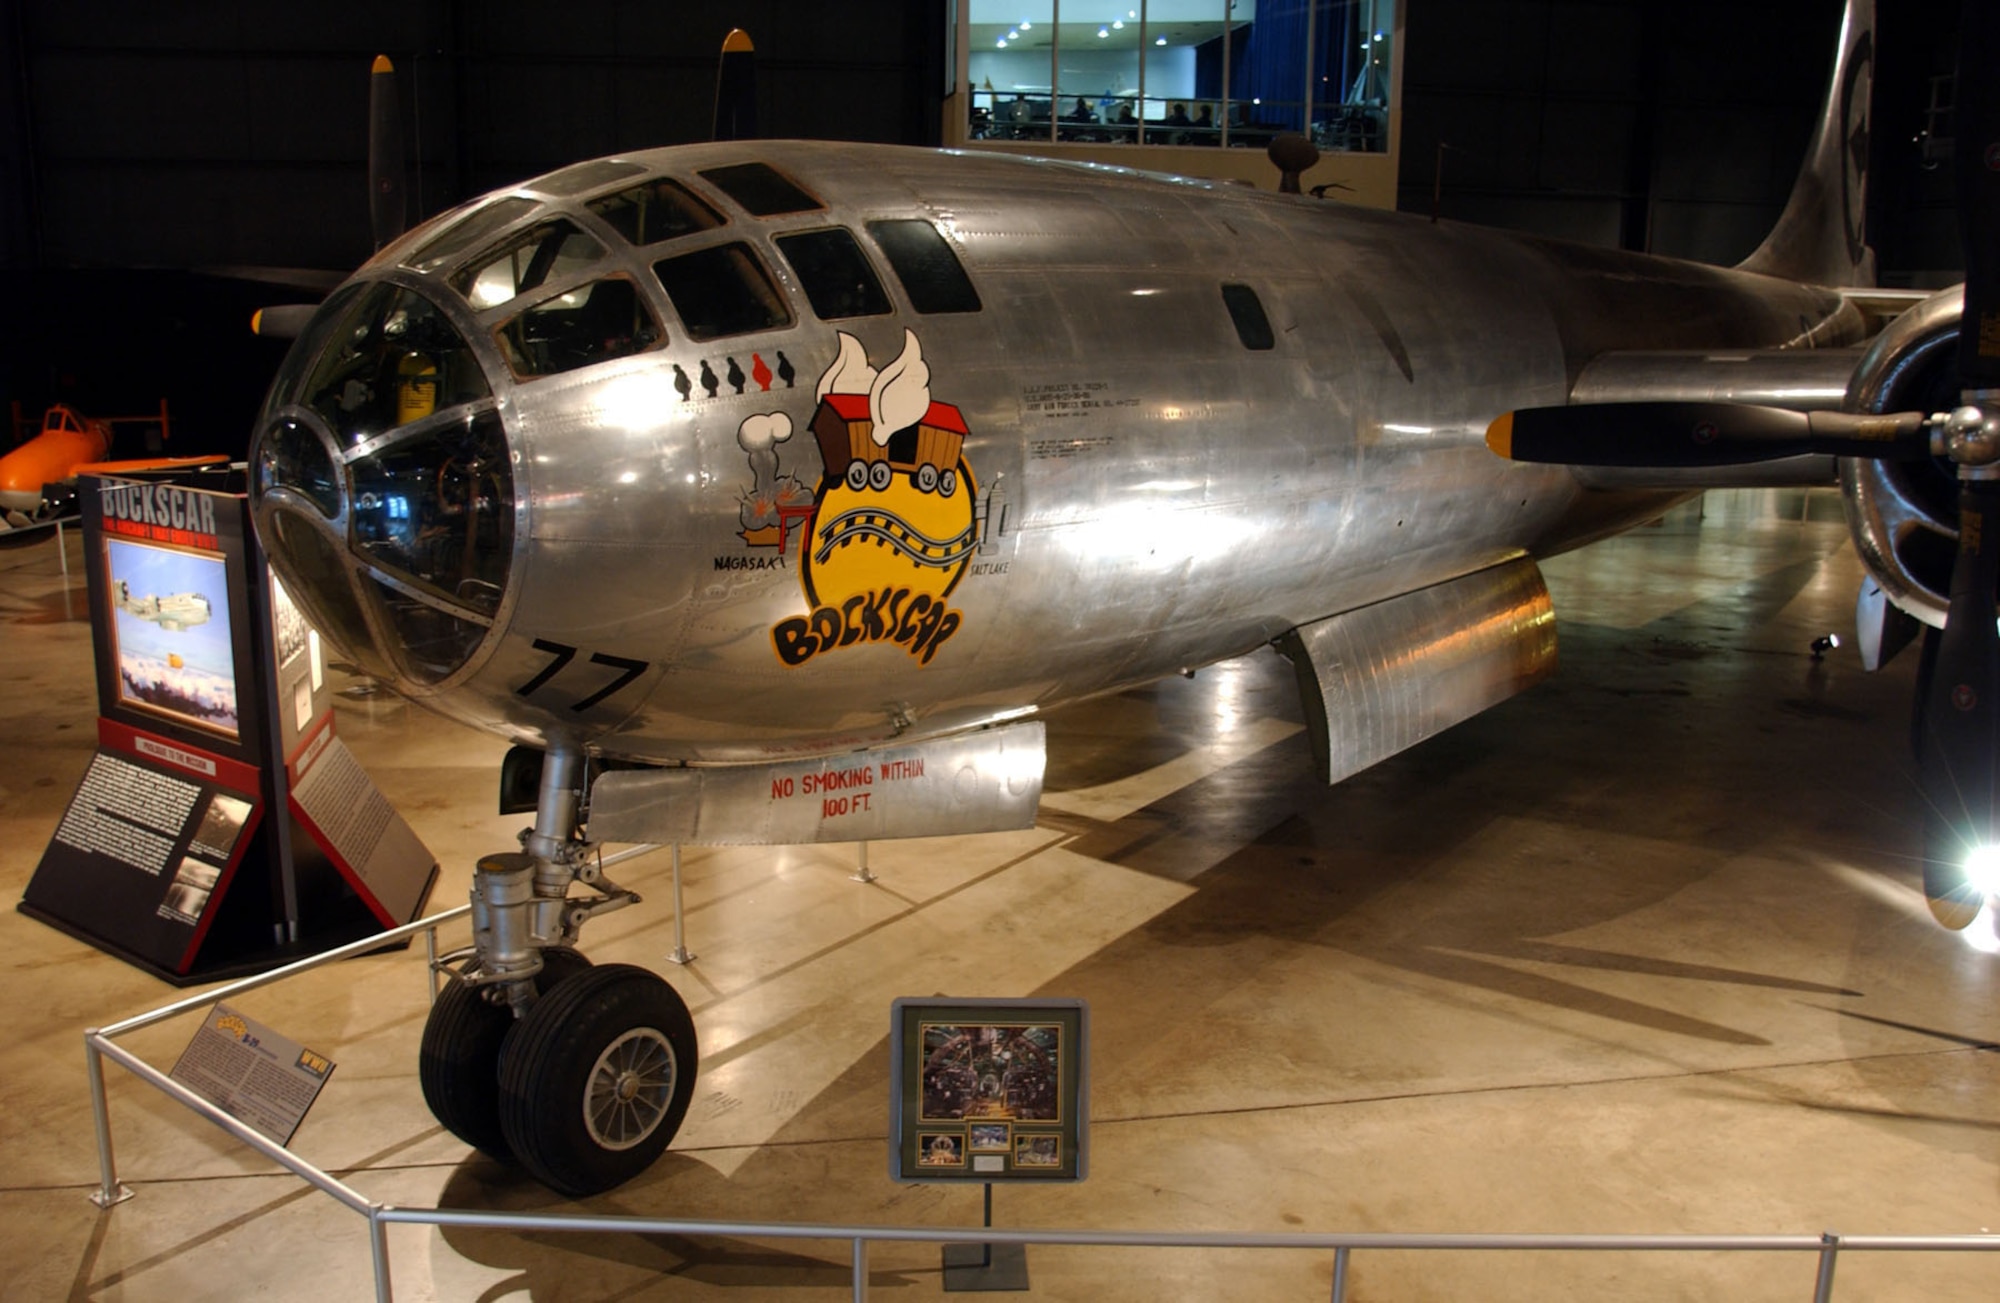 DAYTON, Ohio -- Boeing B-29 Superfortress "Bockscar" in the World War II Gallery at the National Museum of the United States Air Force. (U.S. Air Force photo)